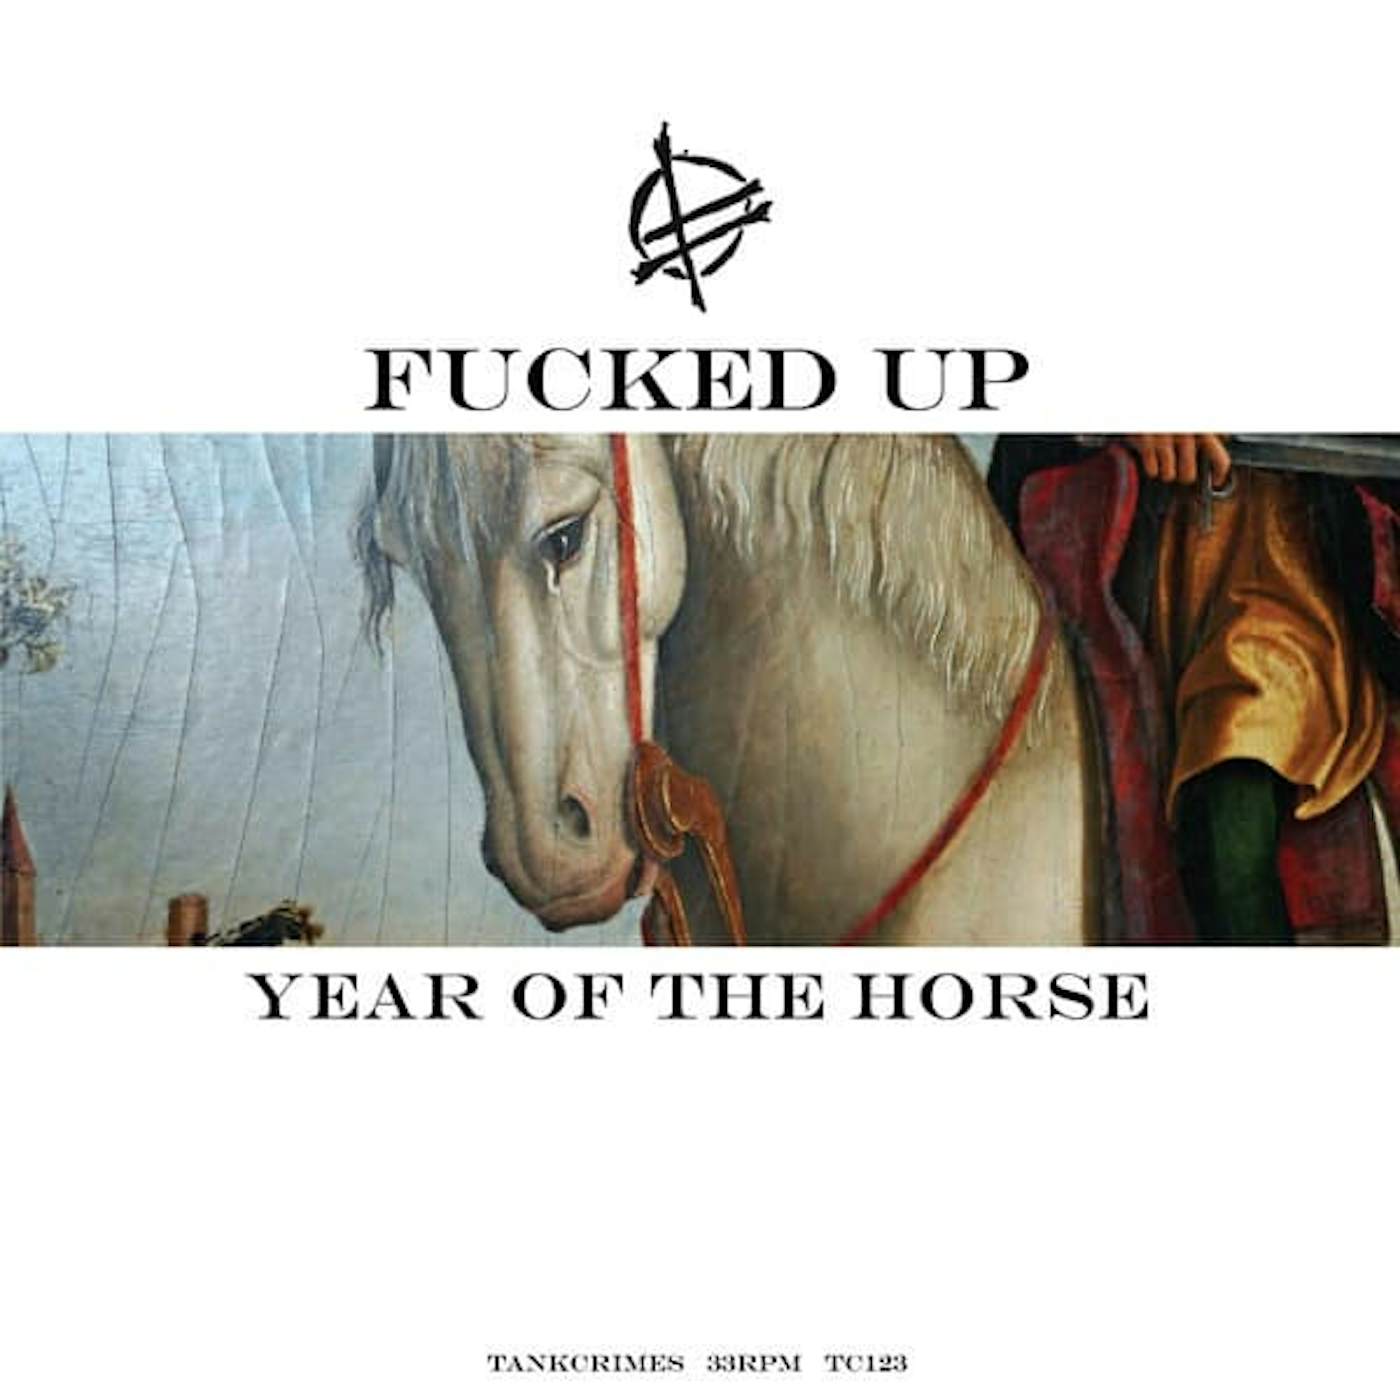 Fucked Up YEAR OF THE HORSE Vinyl Record